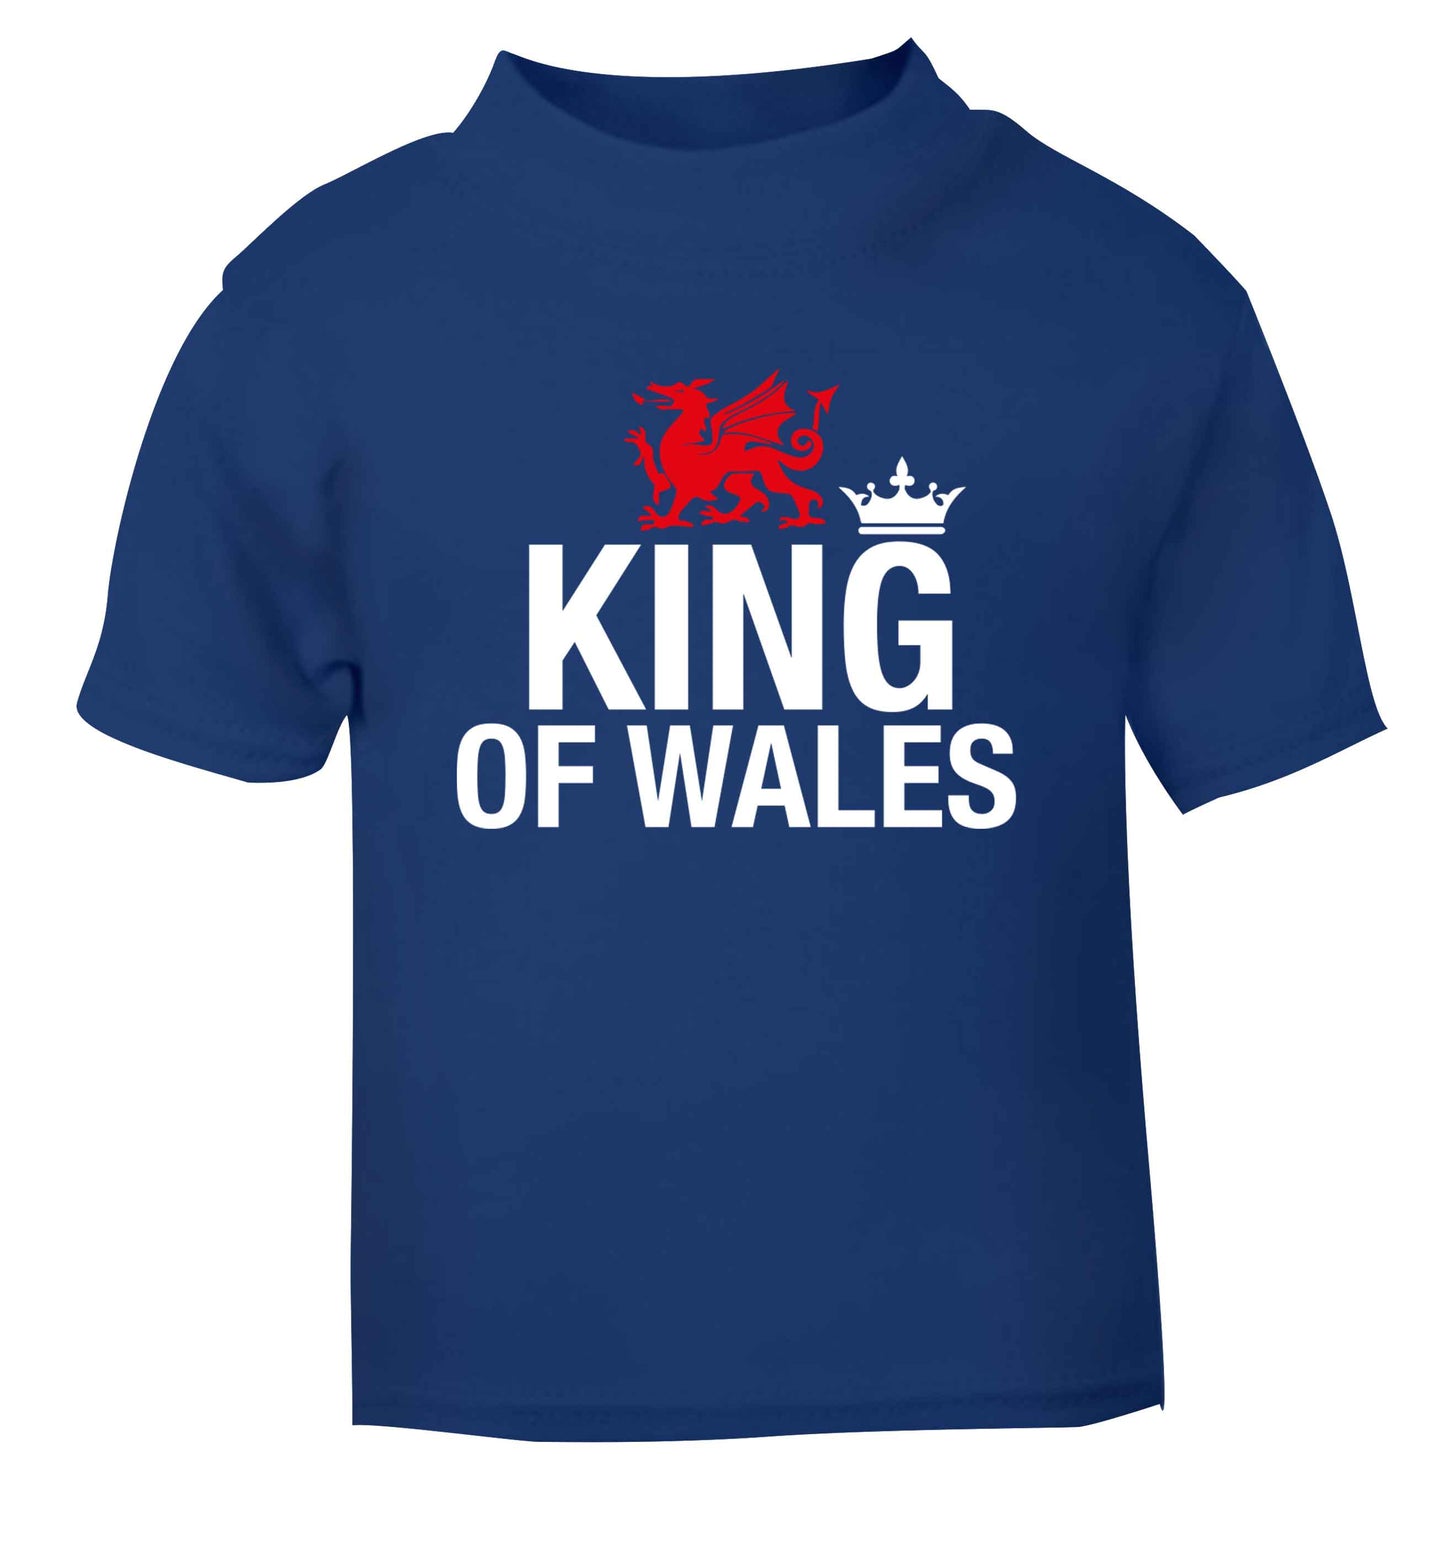 King of Wales blue Baby Toddler Tshirt 2 Years